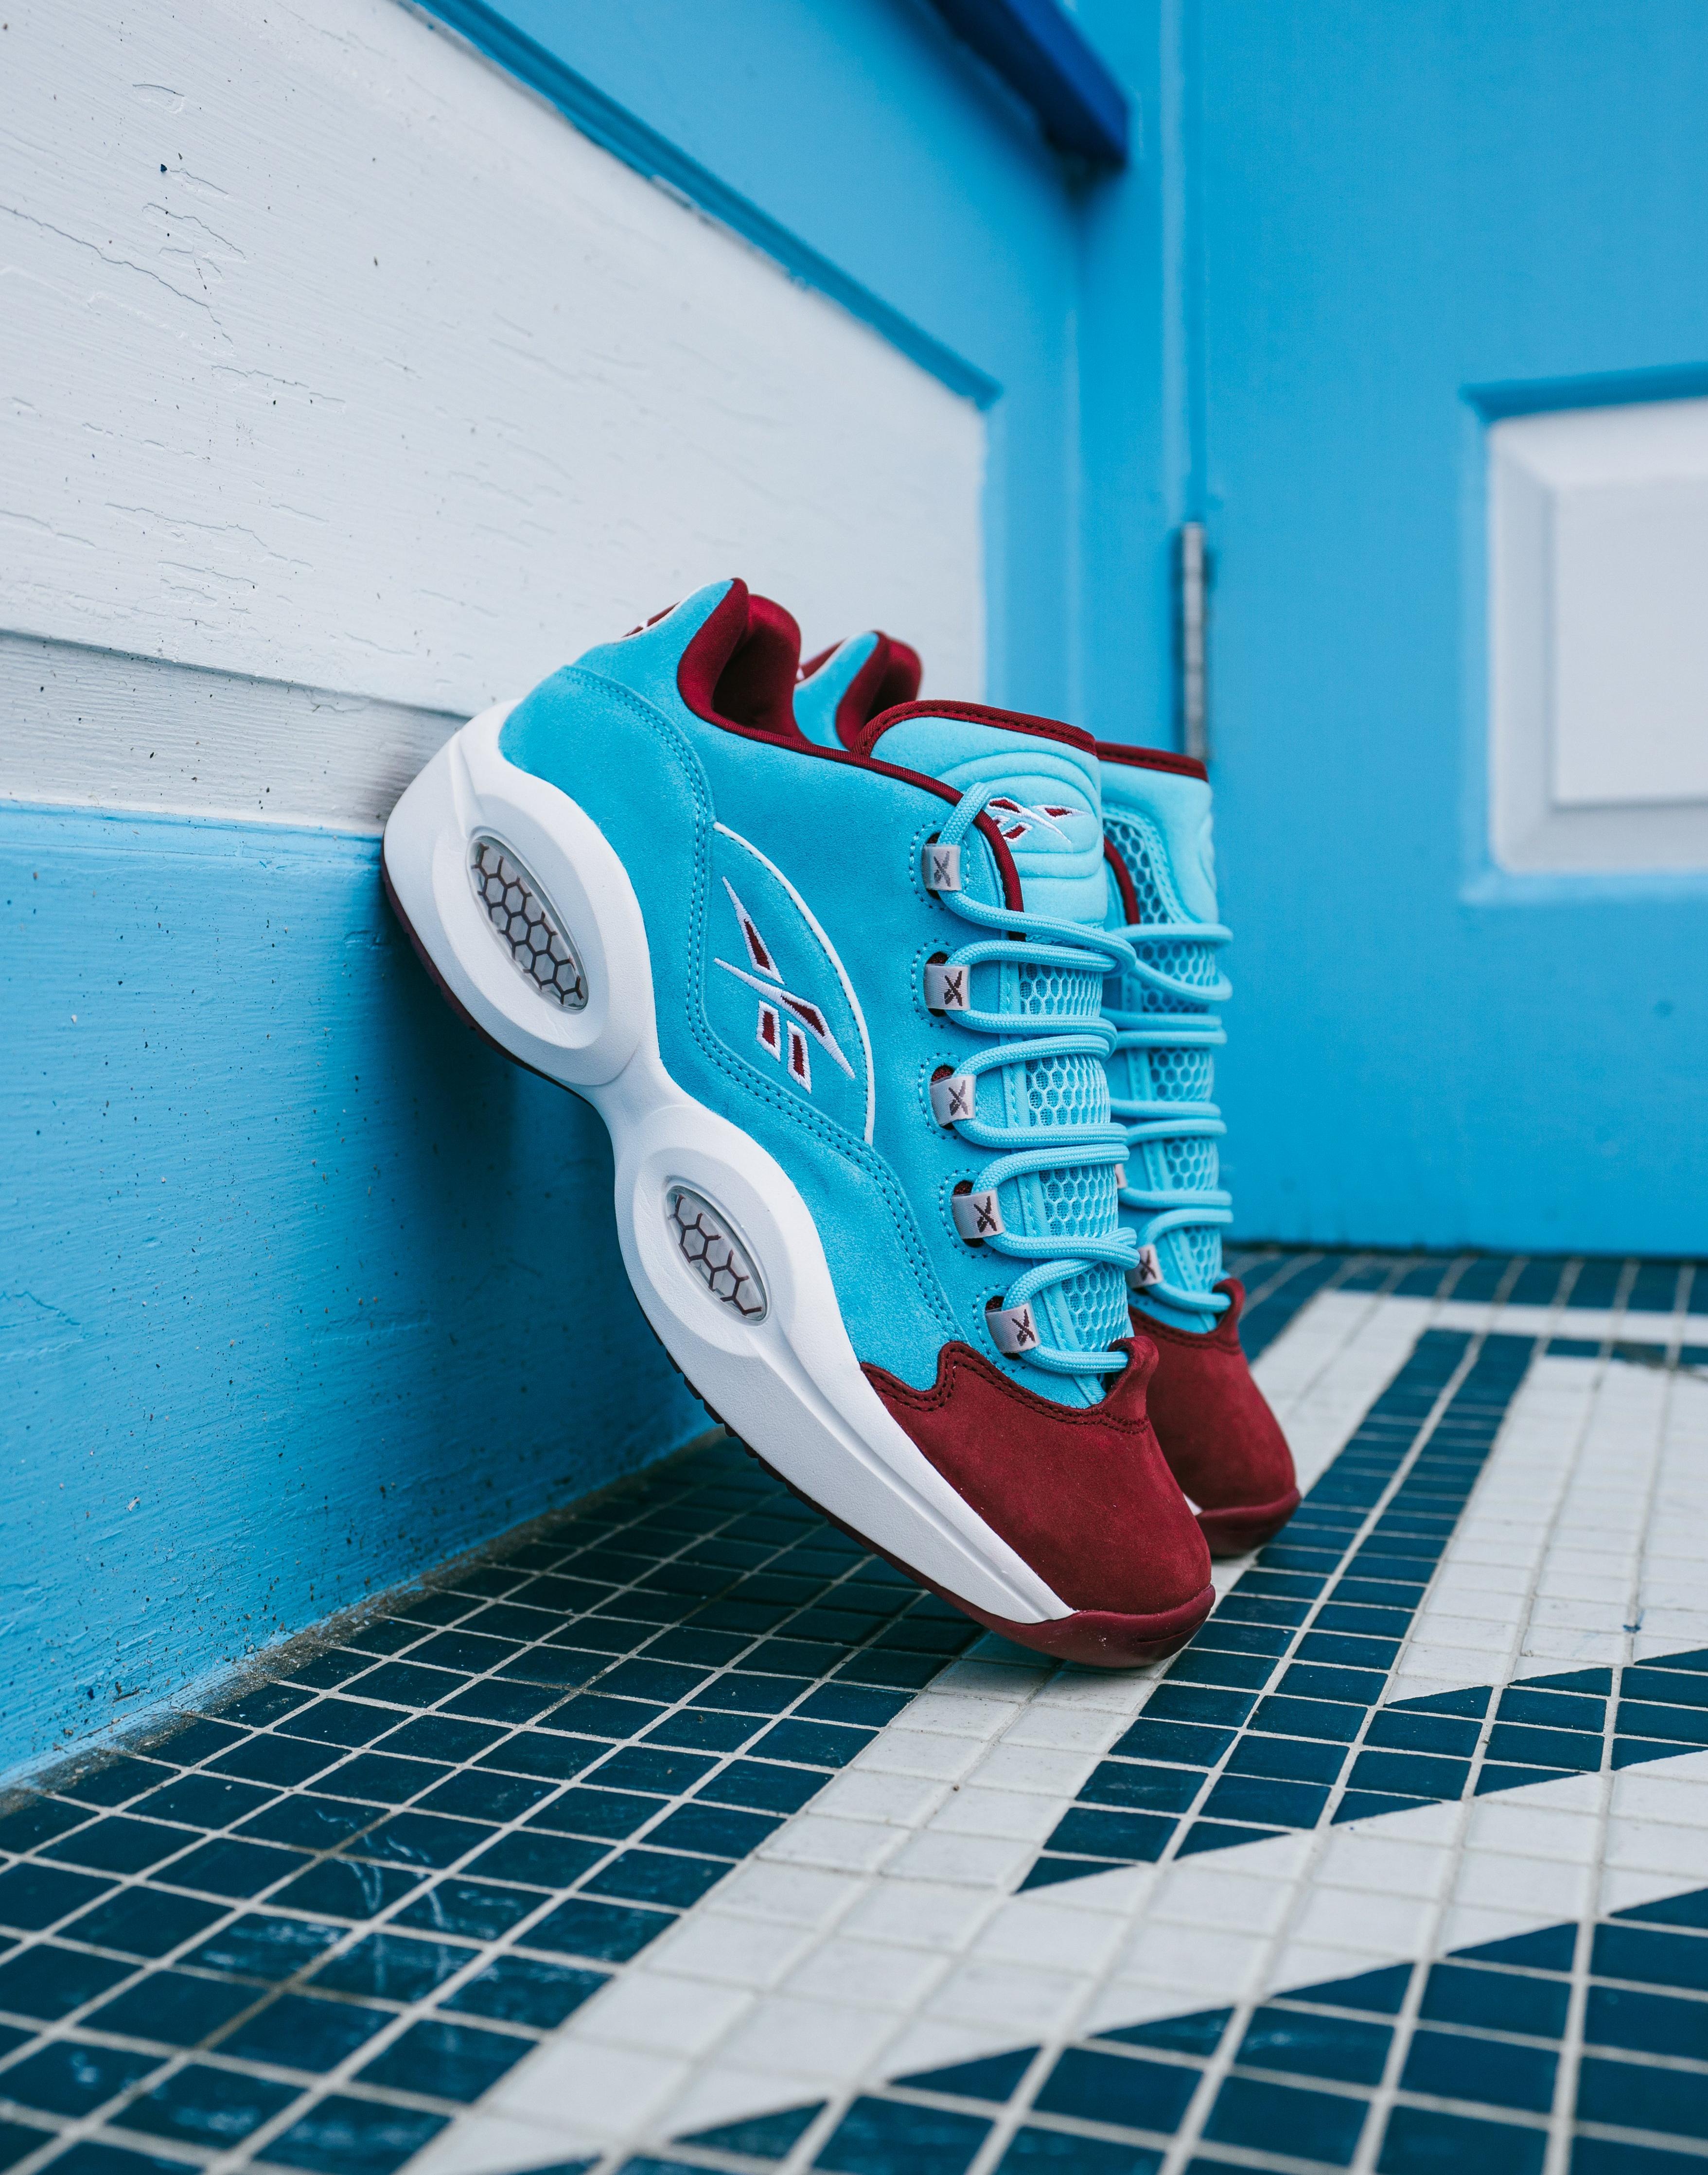 Sneakers Release – Reebok Question Low “Phillies” Digital  Blue/ Classic Burgundy/ White